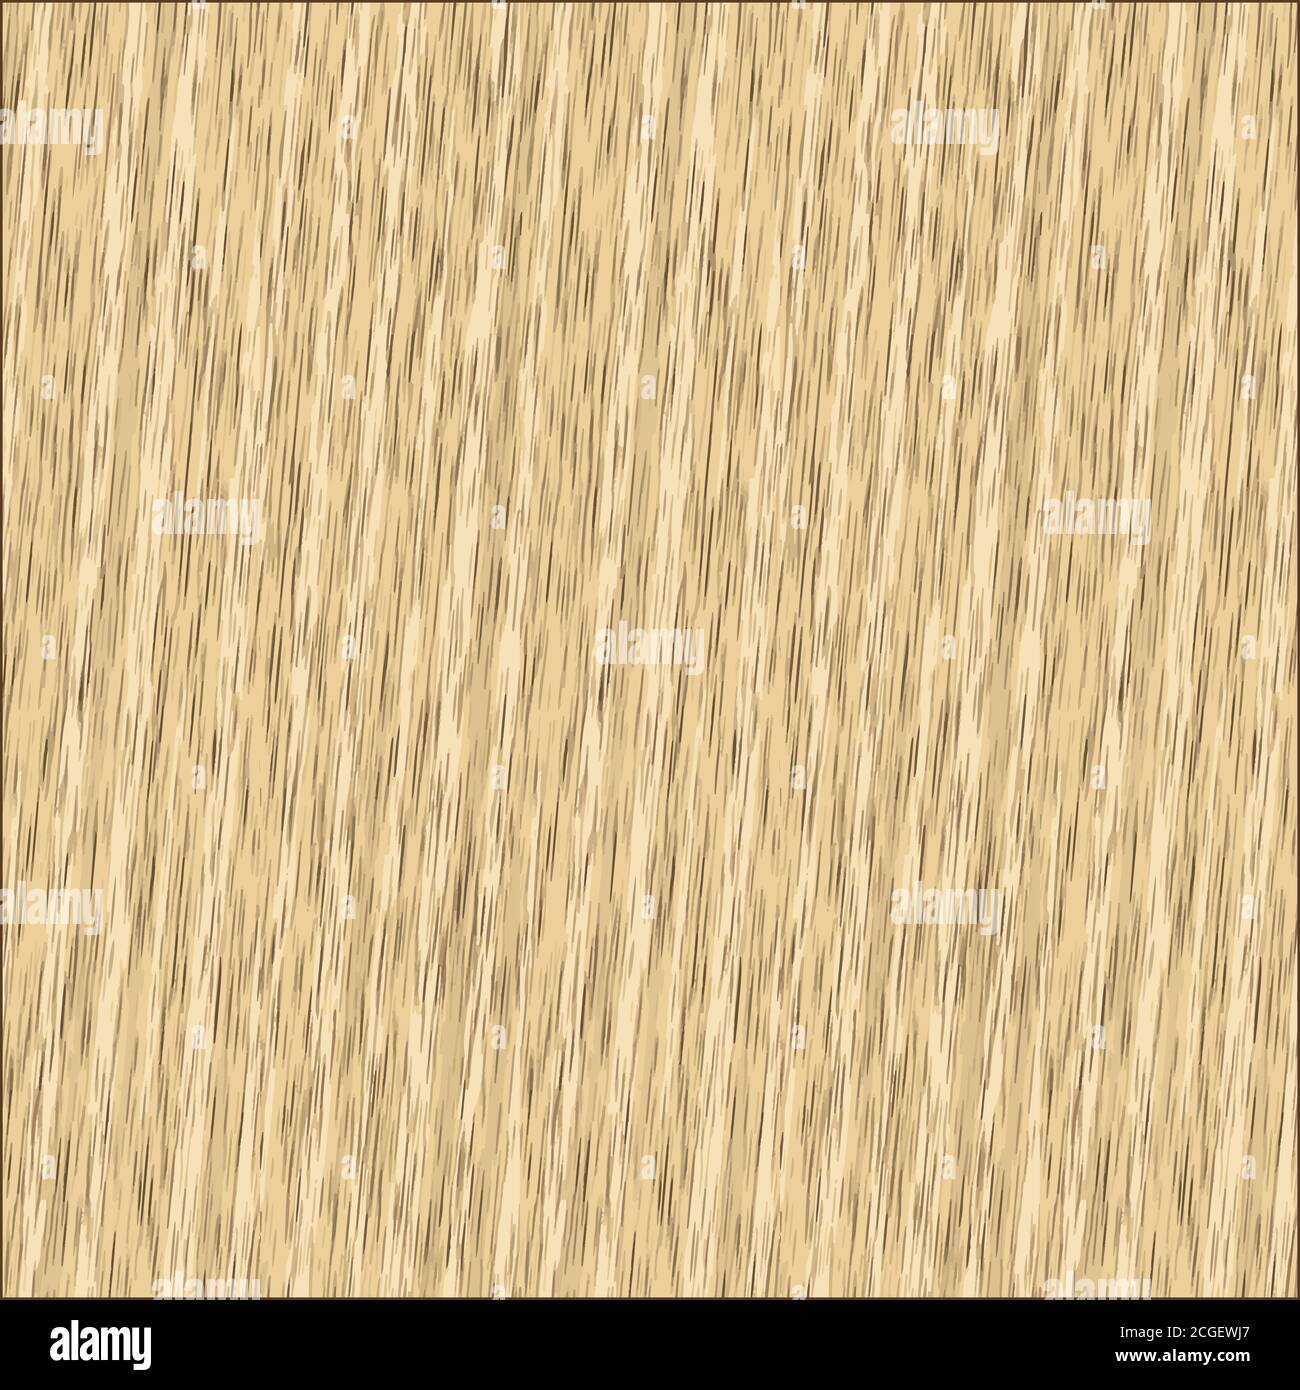 Wooden texture background illustration of natural oak. Colour scheme light and brown. Stock Vector